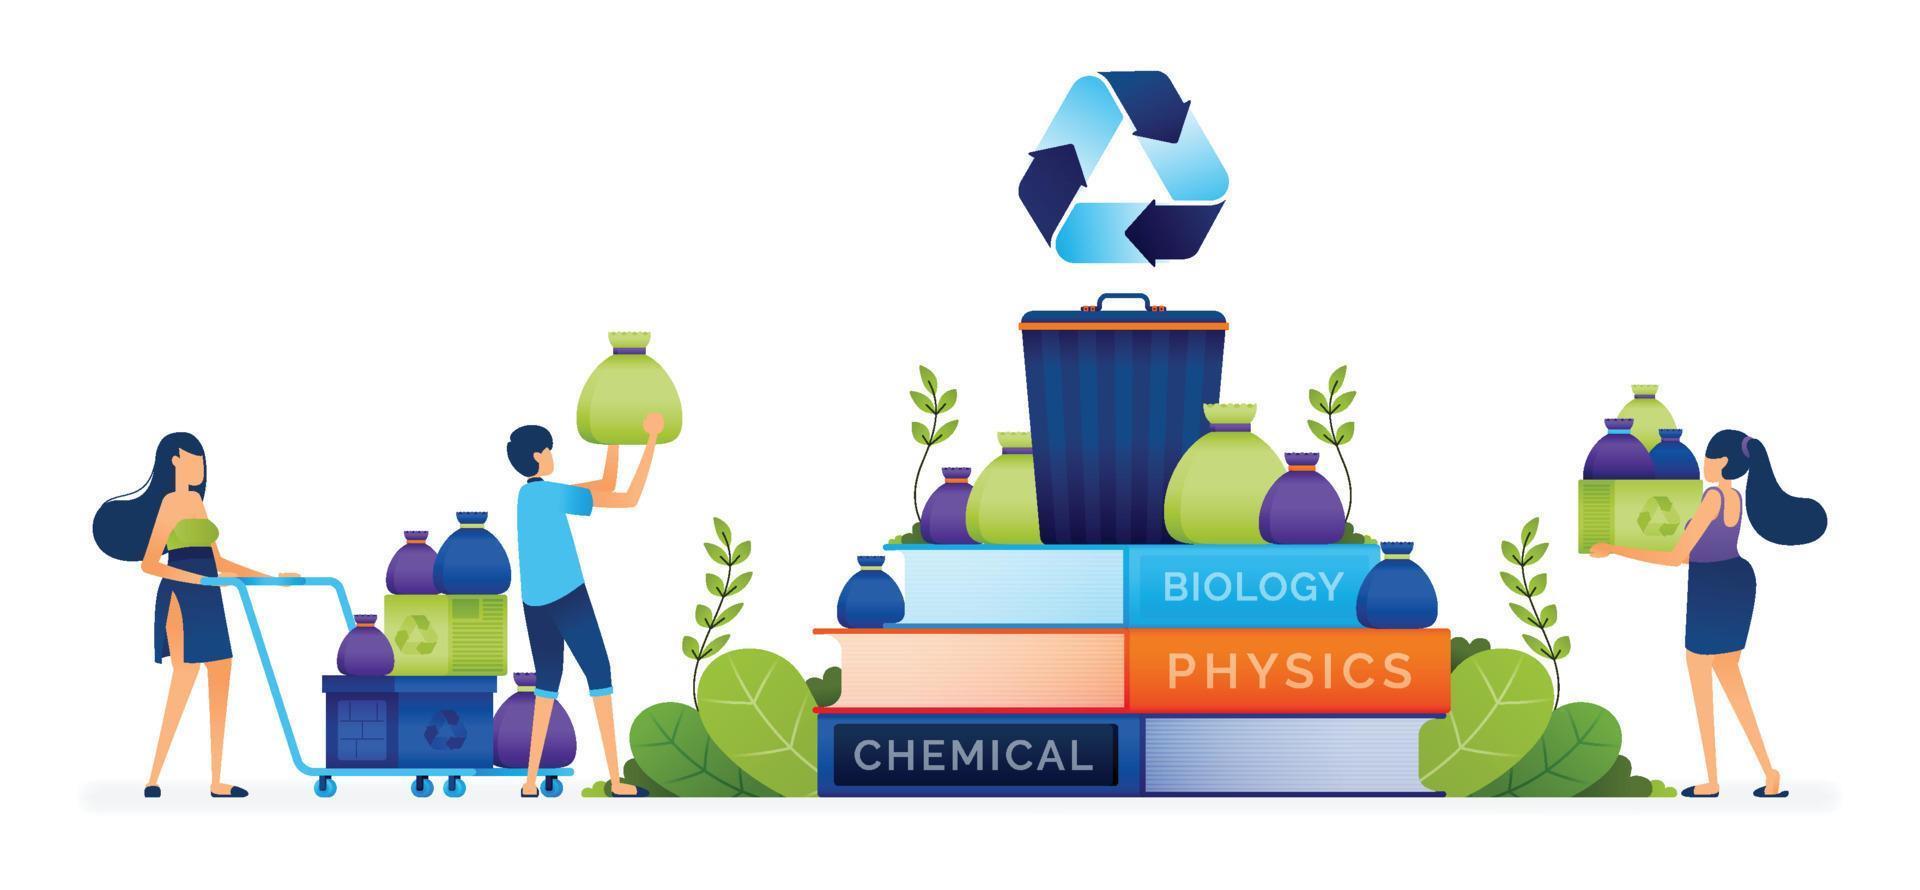 Education illustration of science and learning focused on teaching waste management and long term environmental sustainability. Landing page, web, website, banner, ads, card, apps, brochure, flyer vector